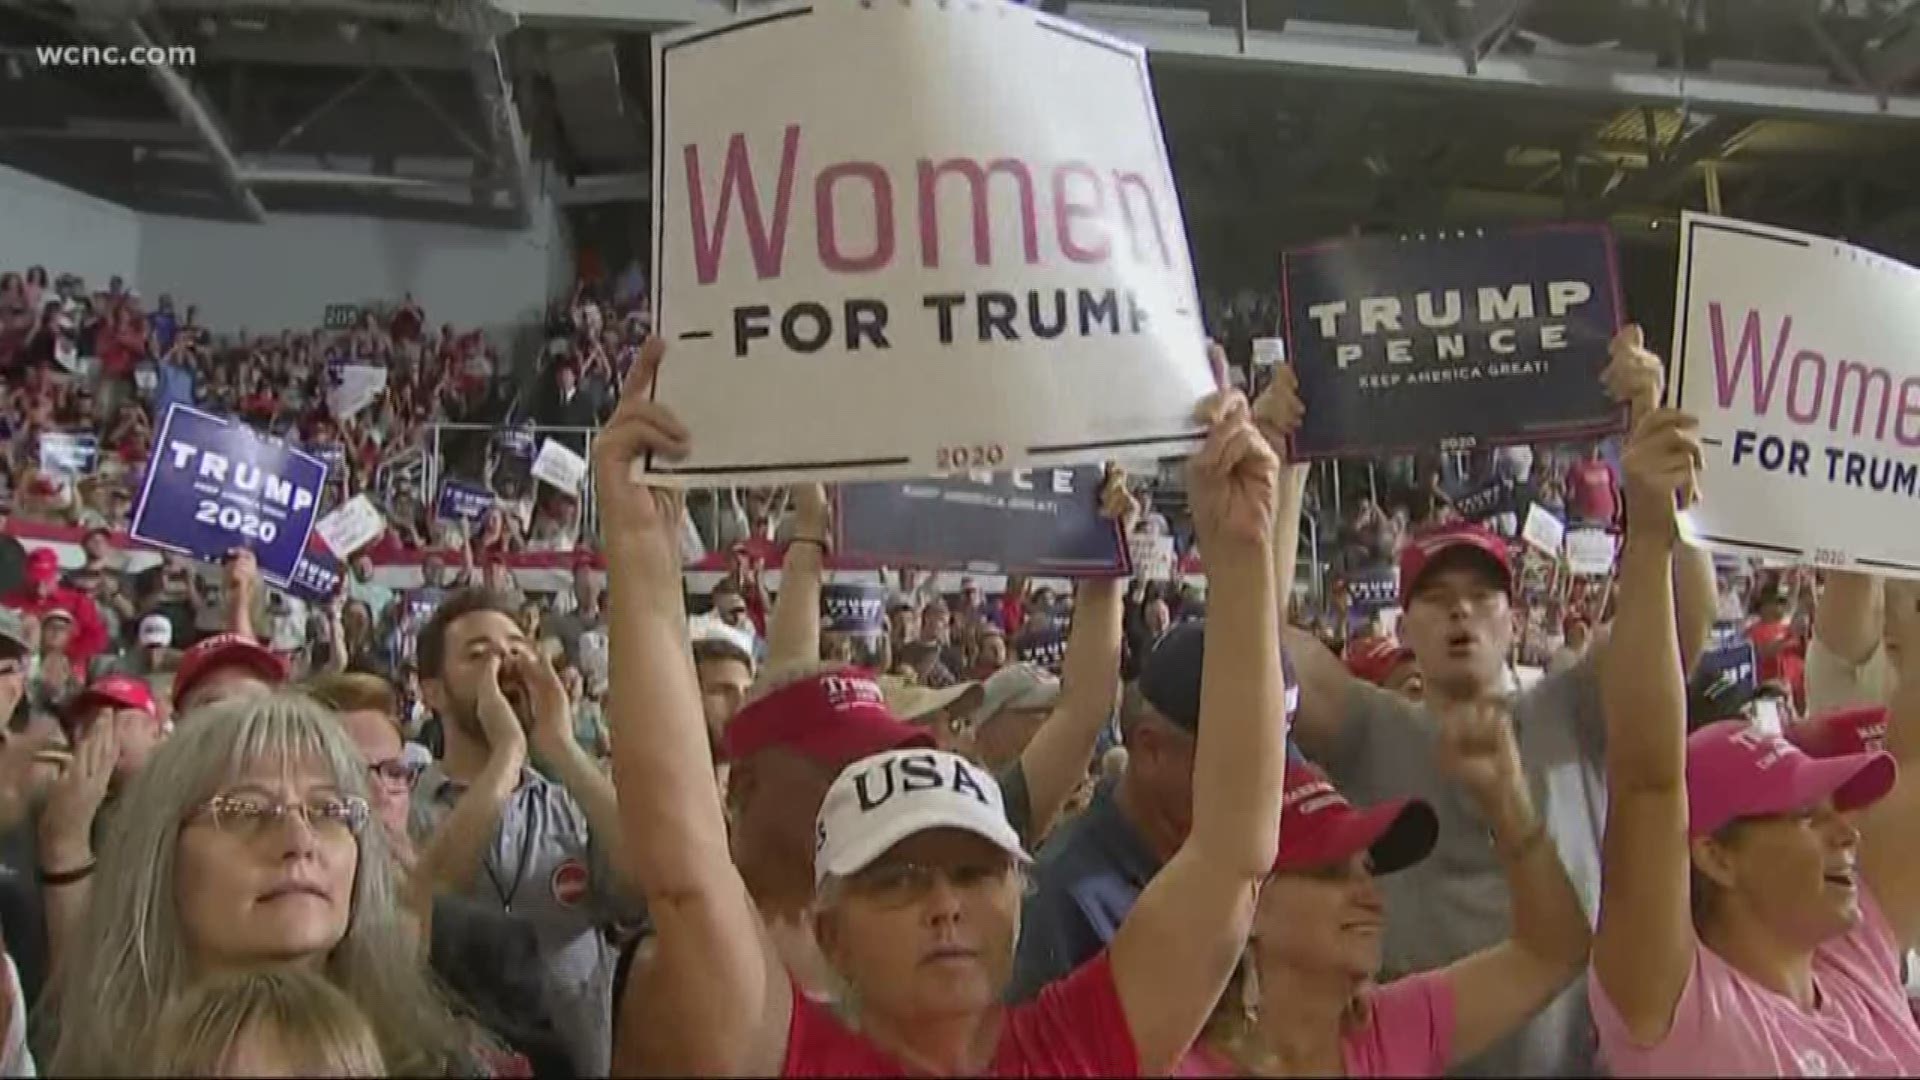 During the rally, Trump lashed out at Congresswoman Alexandria Ocasio-Cortez, and three other women members of Congress.